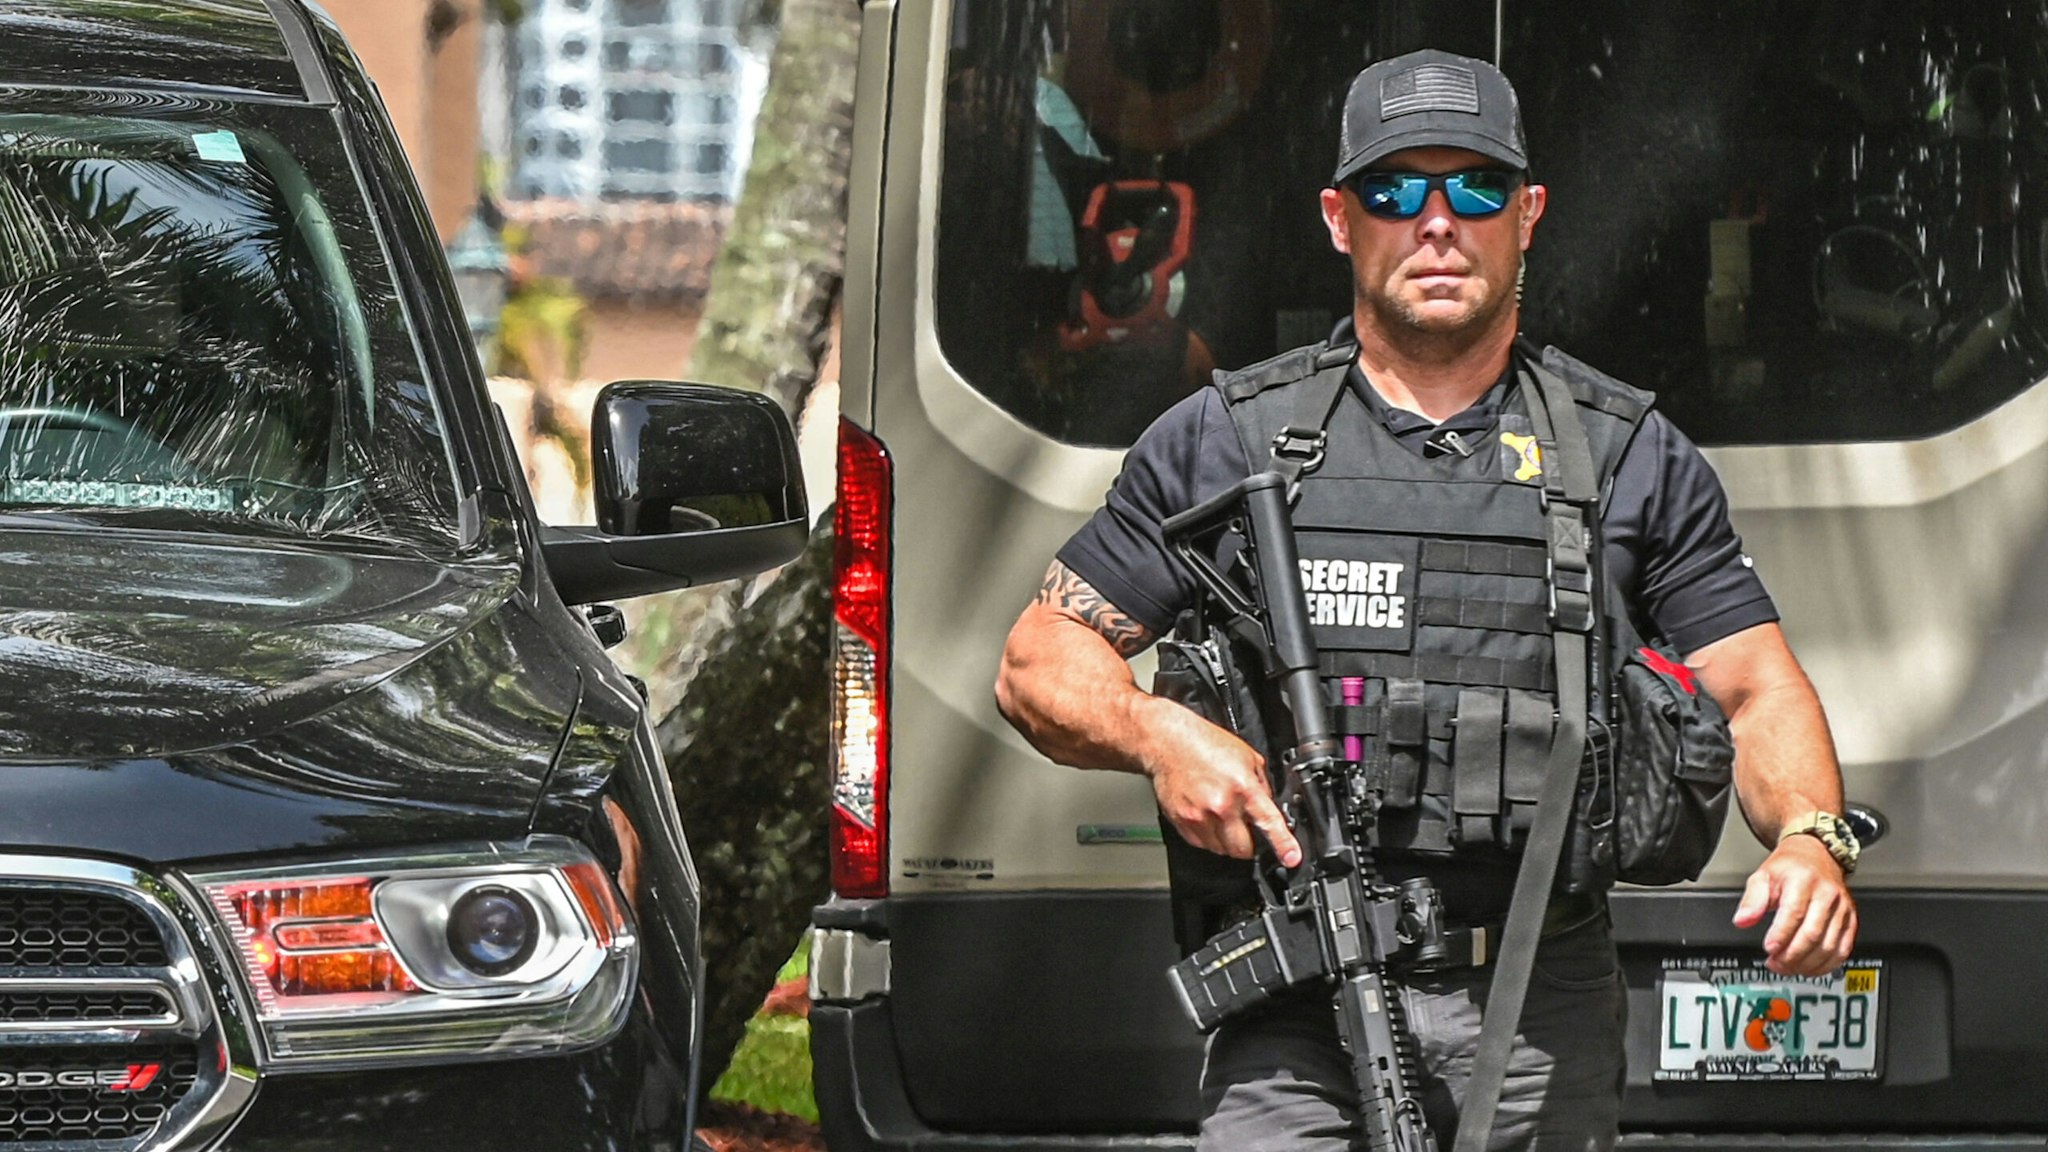 A member of the Secret Service is seen in front of the home of former President Donald Trump at Mar-A-Lago in Palm Beach, Florida on August 9, 2022. - Former US president Donald Trump said August 8, 2022 that his Mar-A-Lago residence in Florida was being "raided" by FBI agents in what he called an act of "prosecutorial misconduct."